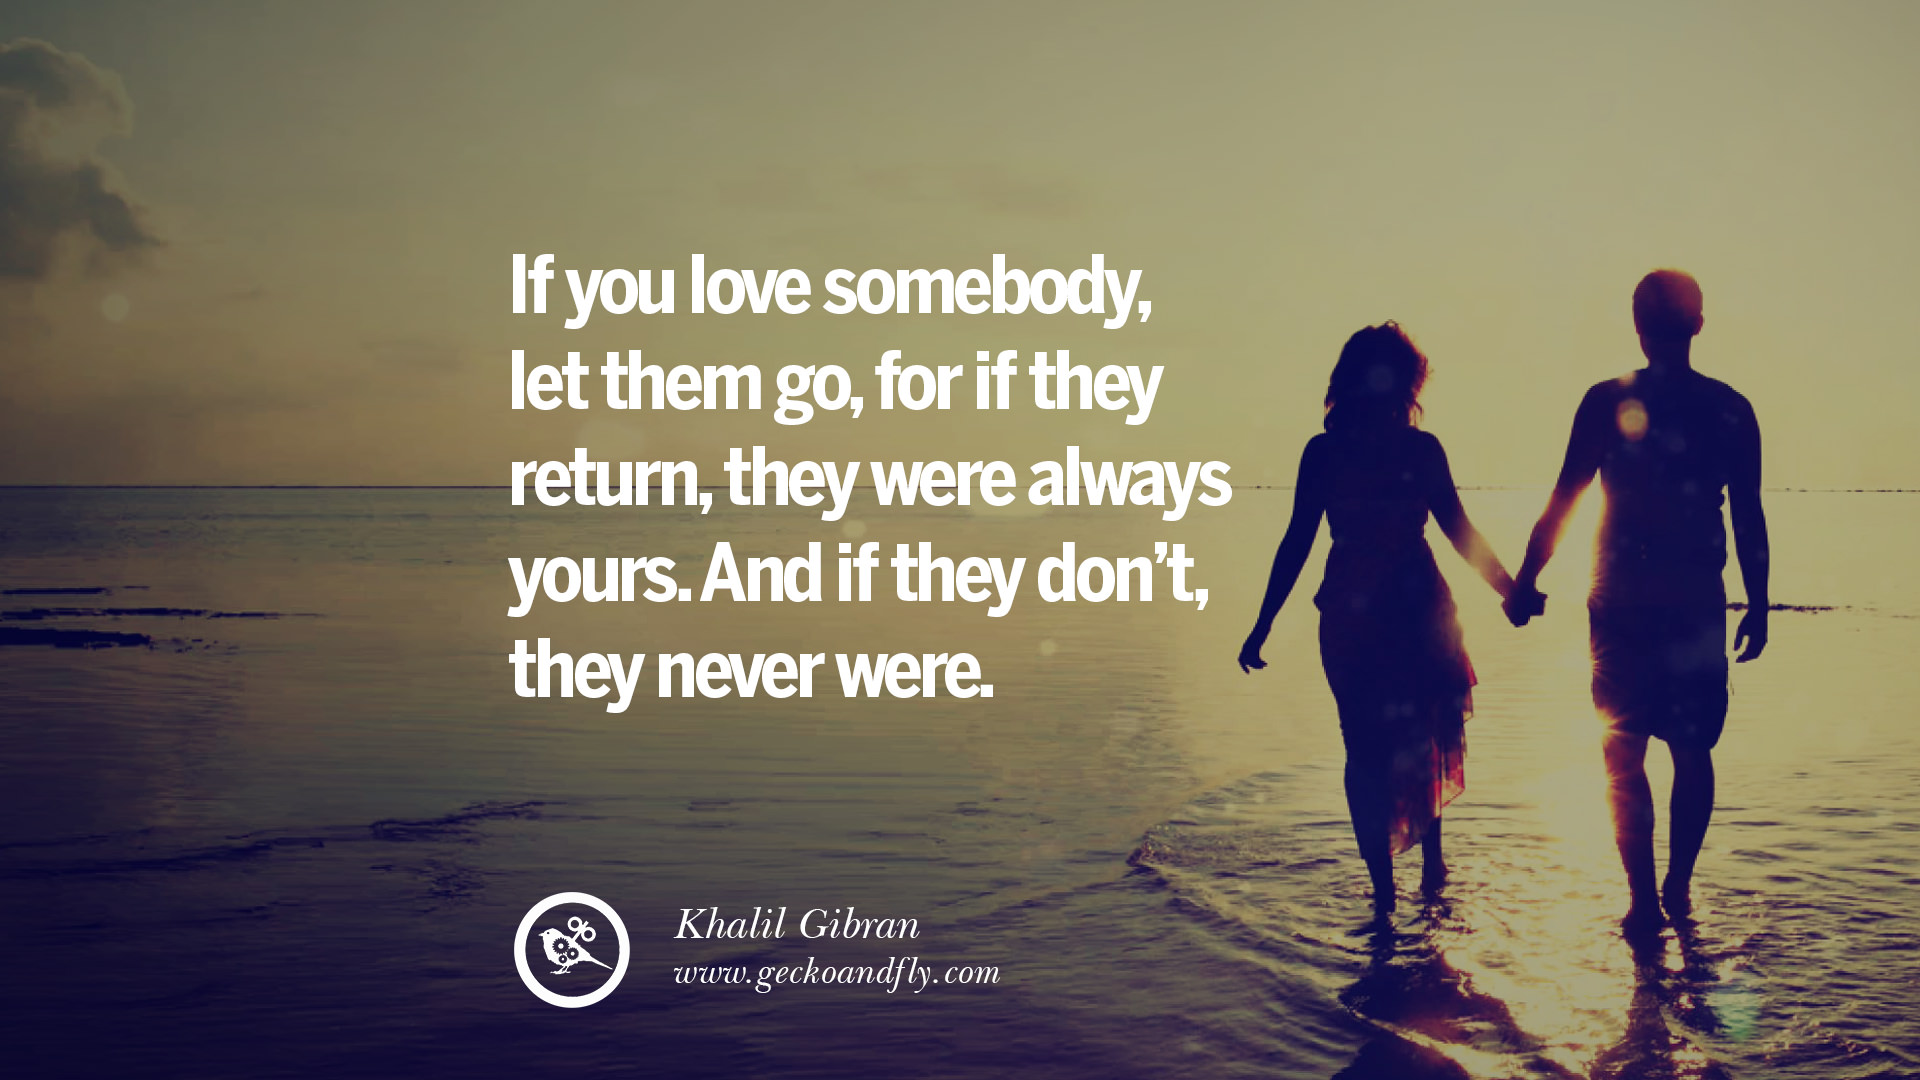 Quotes About Moving On And Letting Go A Bad Break Up